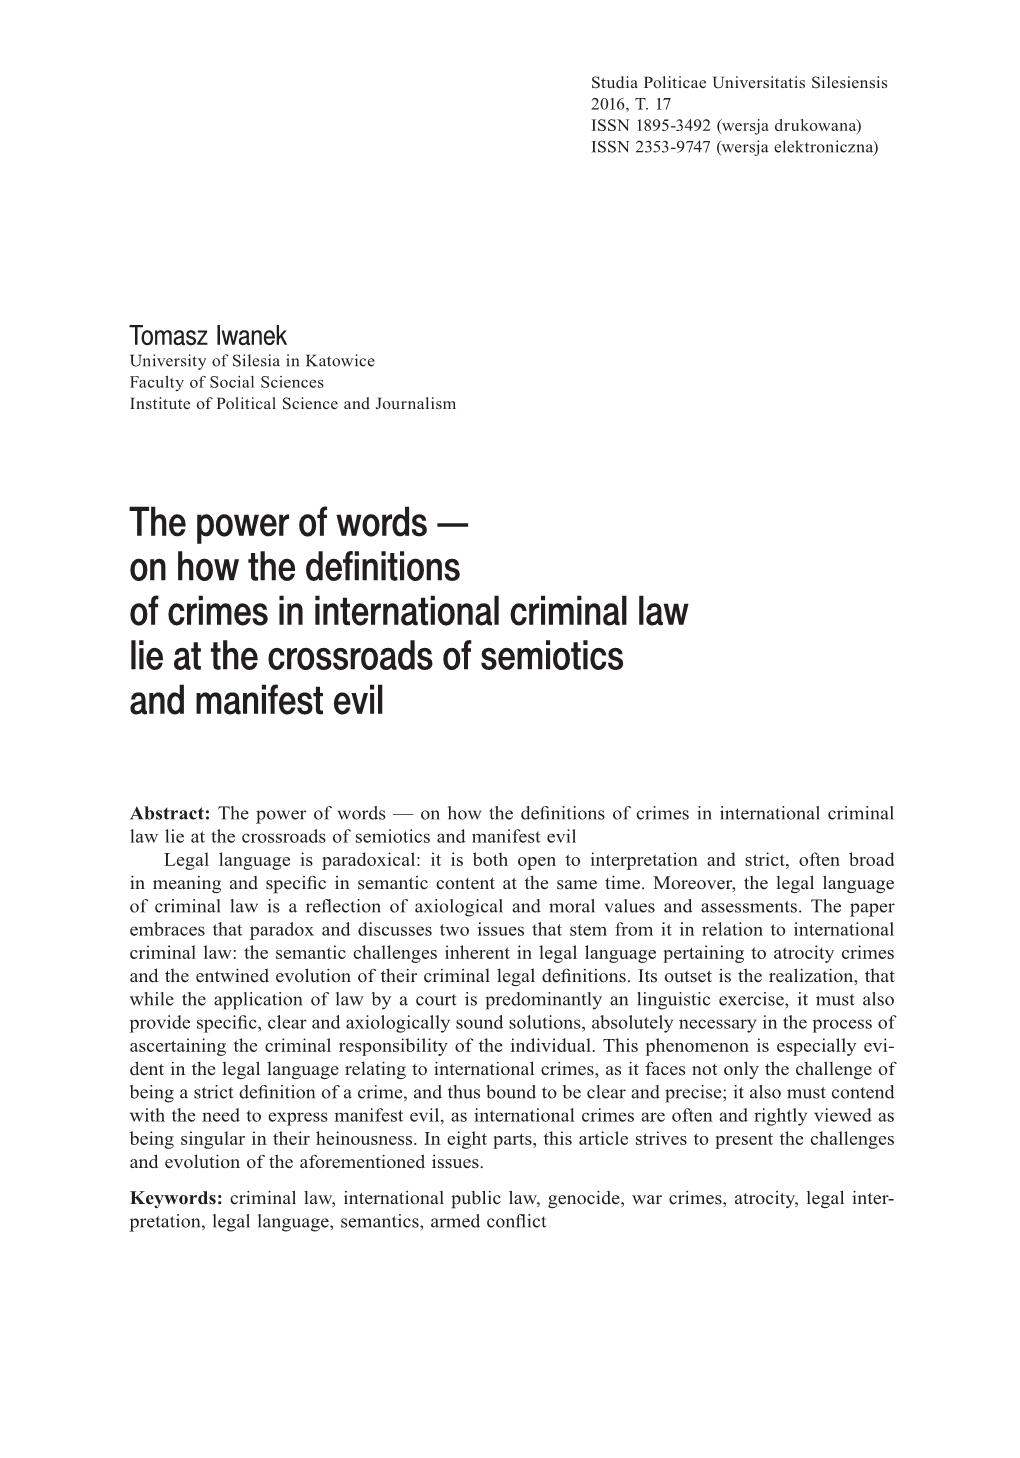 On How the Definitions of Crimes in International Criminal Law Lie at the Crossroads of Semiotics and Manifest Evil